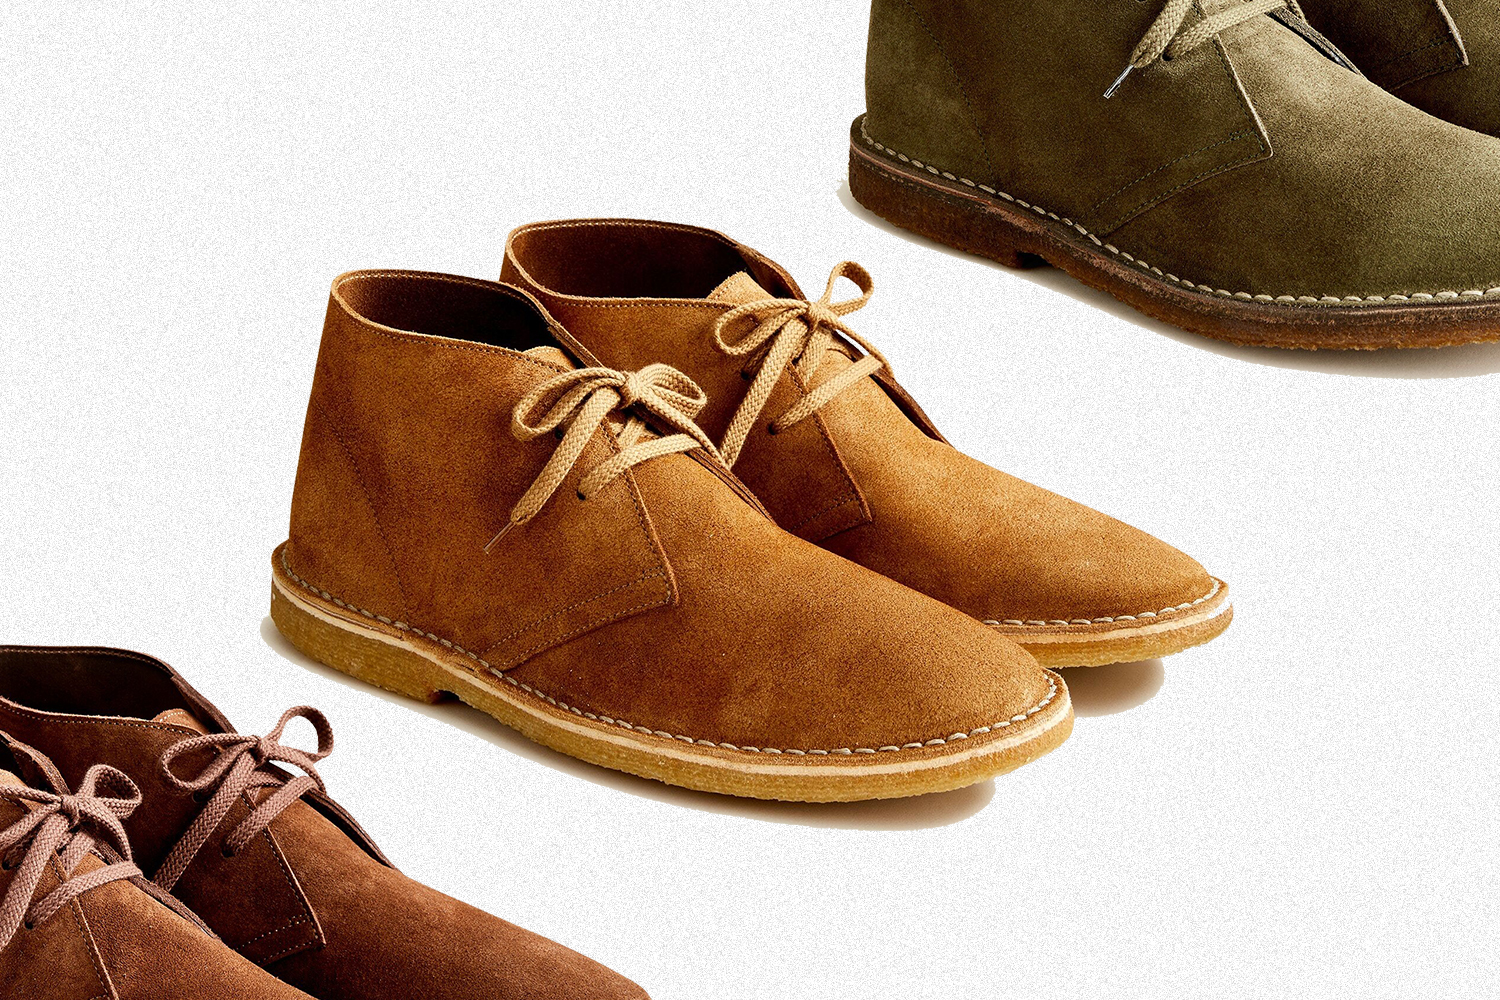 Three pairs of J.Crew MacAlister desert boots, in the colors autumn gold, hunting green and auburn. The Clarks competitors are on sale for 24% off.